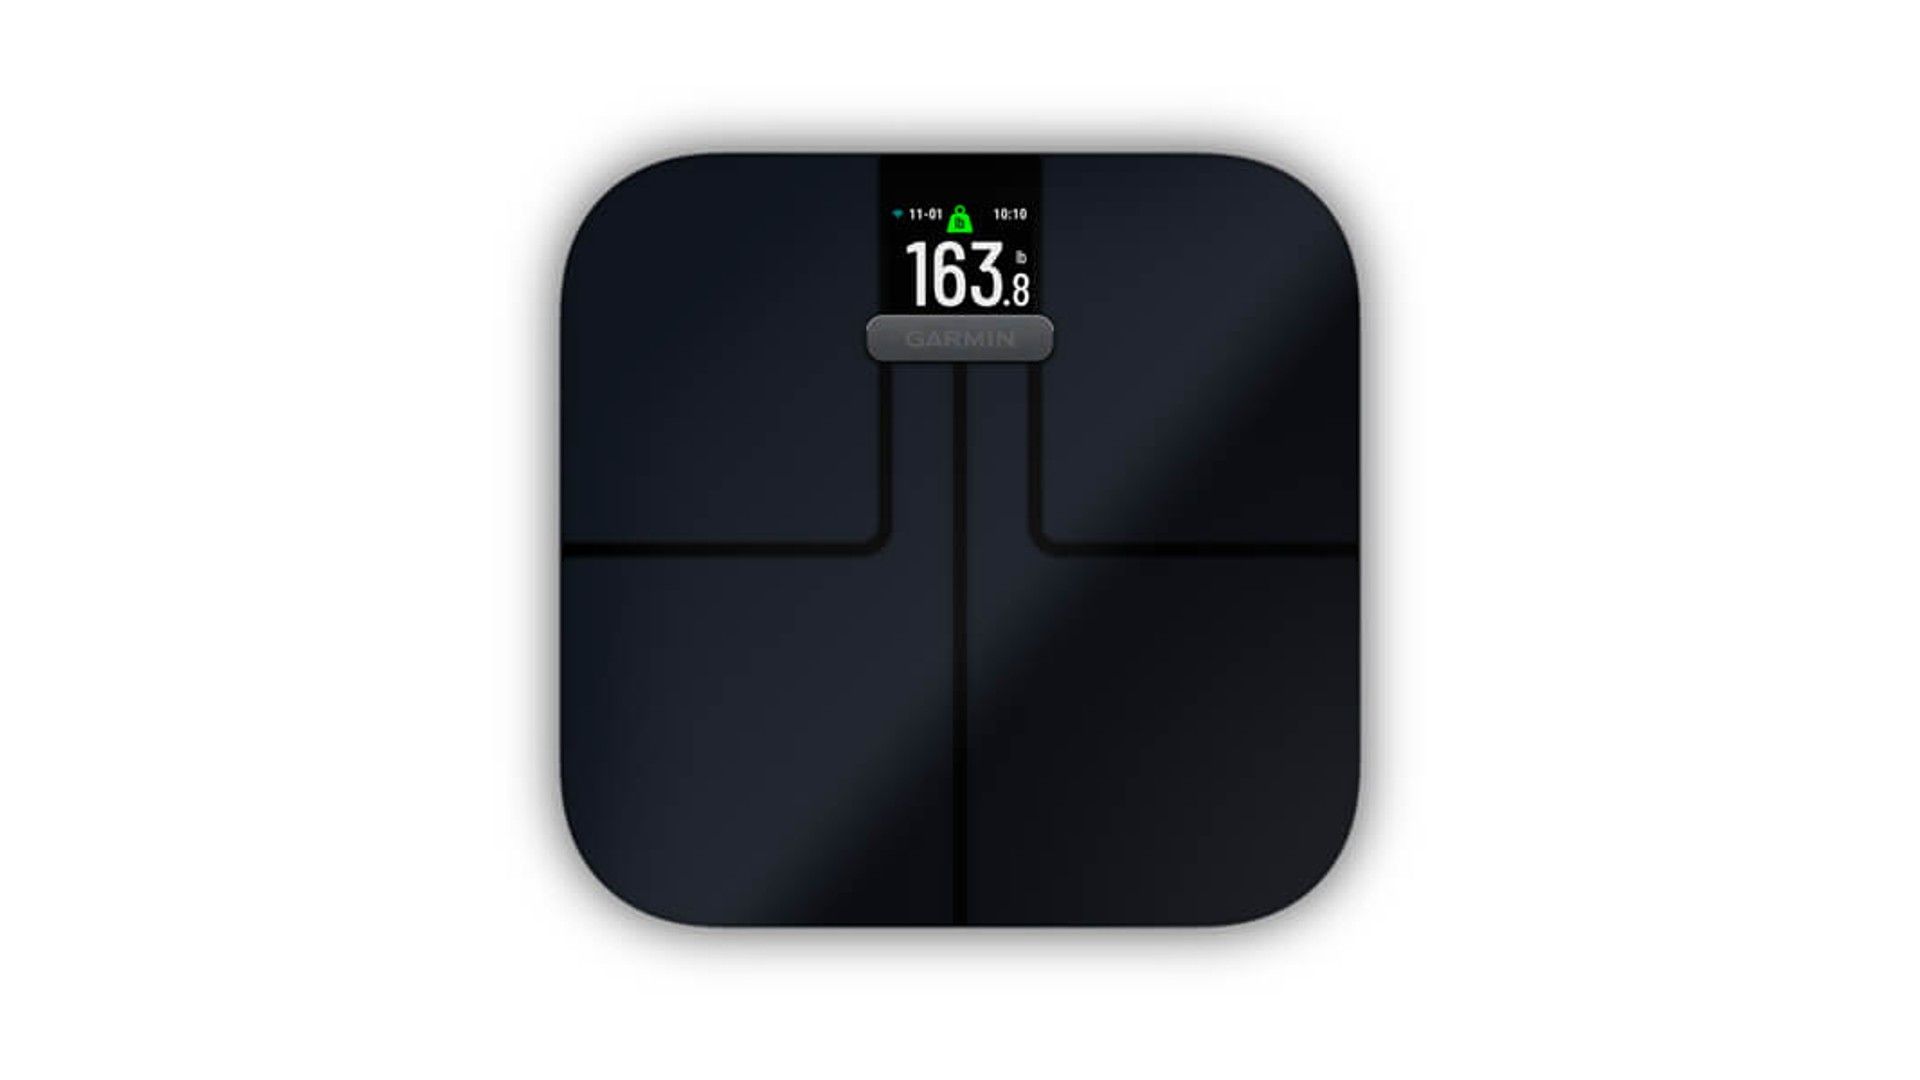 Garmin Index Smart Scale support: Data from the Garmin Smart Scale